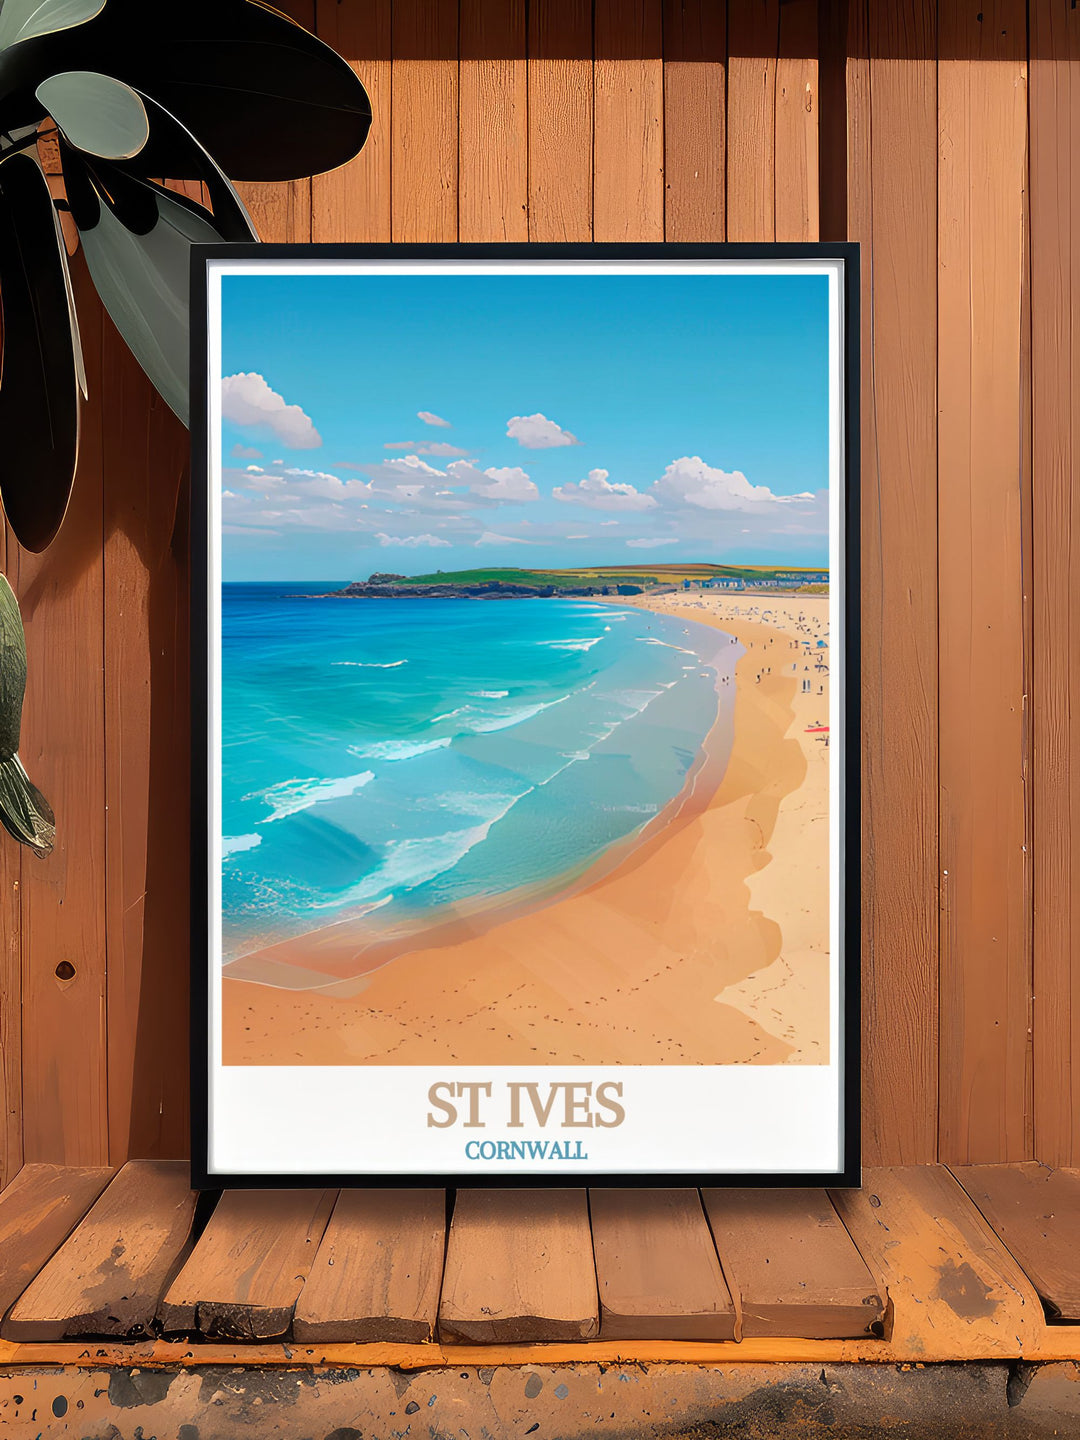 The picturesque Porthmeor Beach and the vibrant culture of St Ives are beautifully illustrated in this poster, offering a glimpse into the fascinating history and scenic beauty of Cornwall.